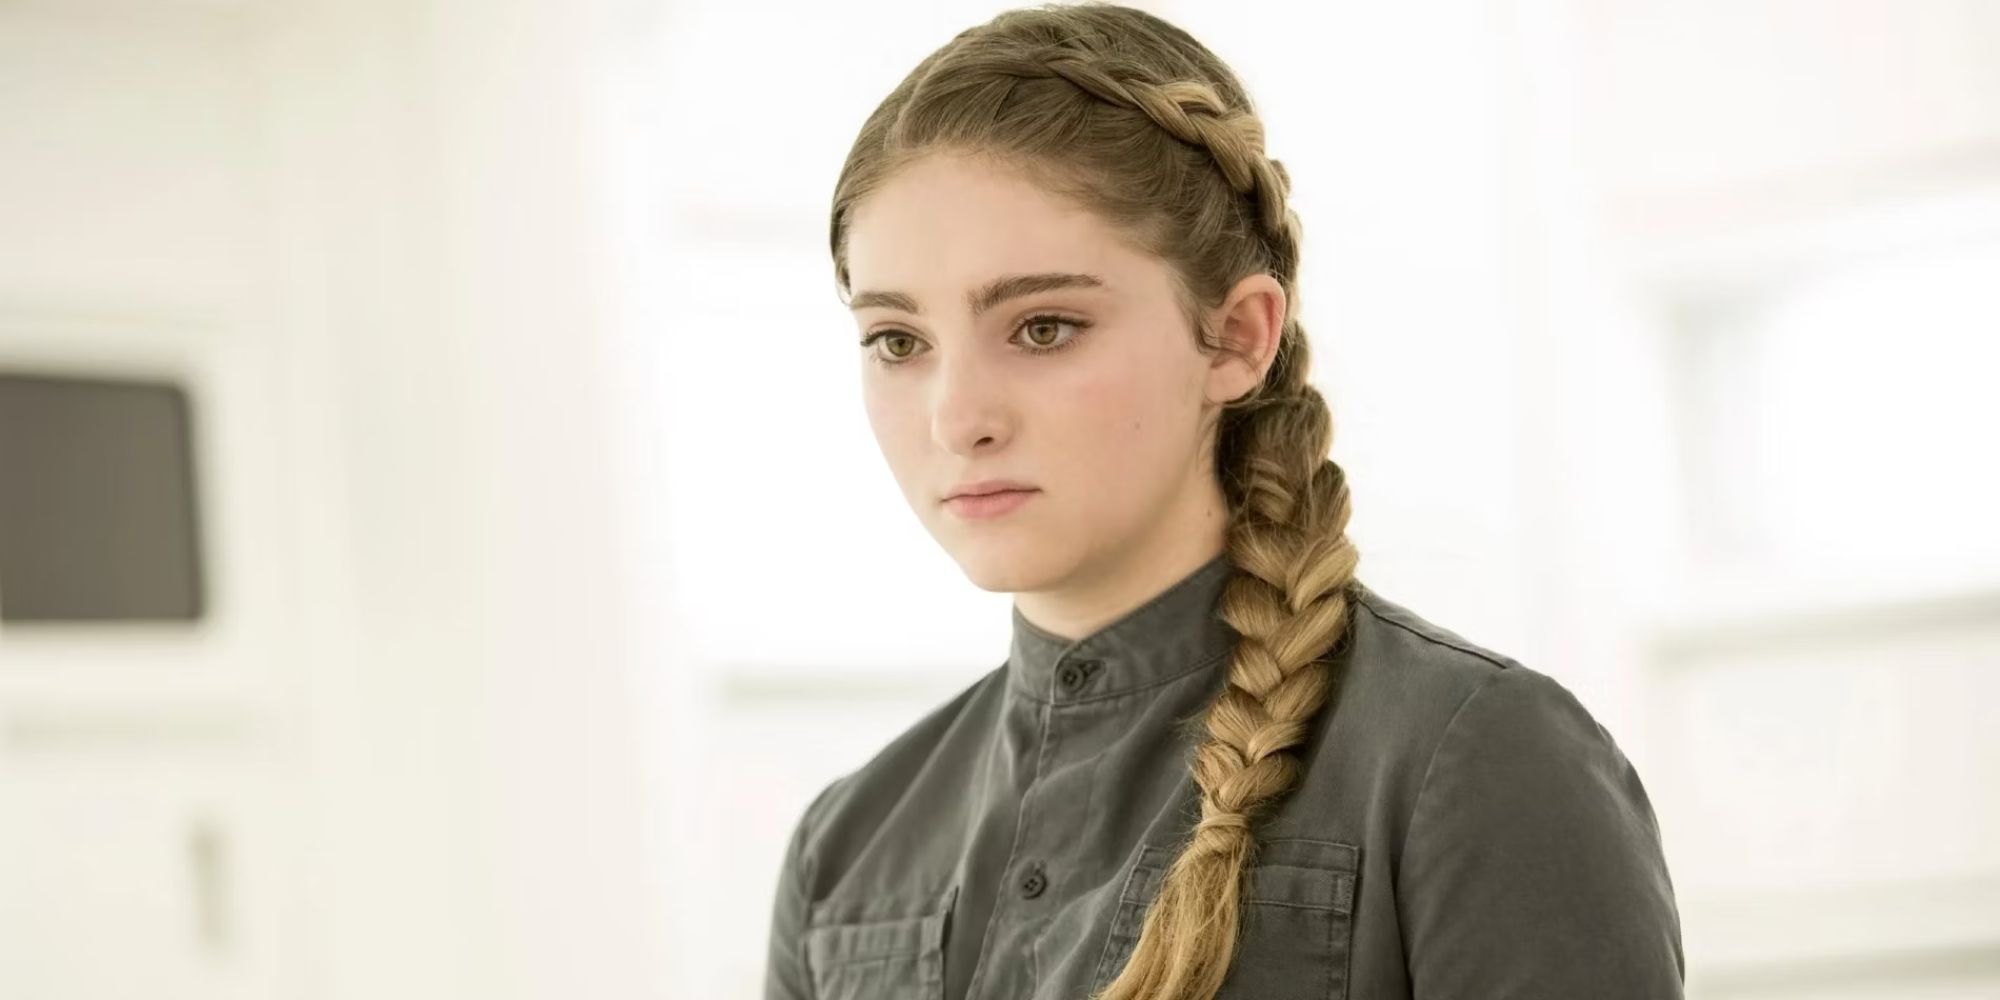 Prim in The Hunger Games (1)